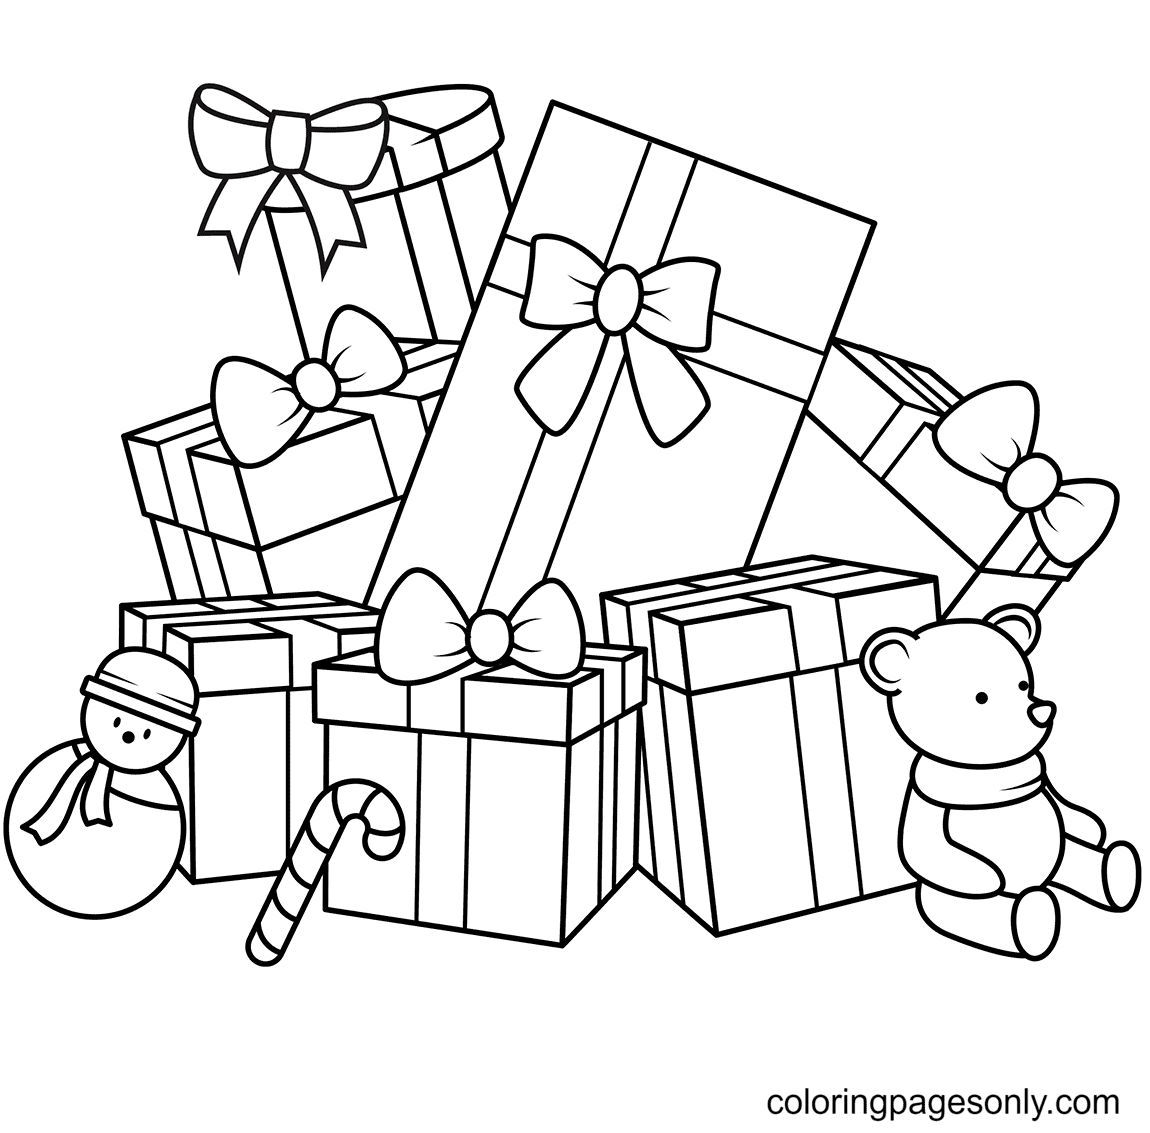 Beautiful Christmas Gifts Coloring Page